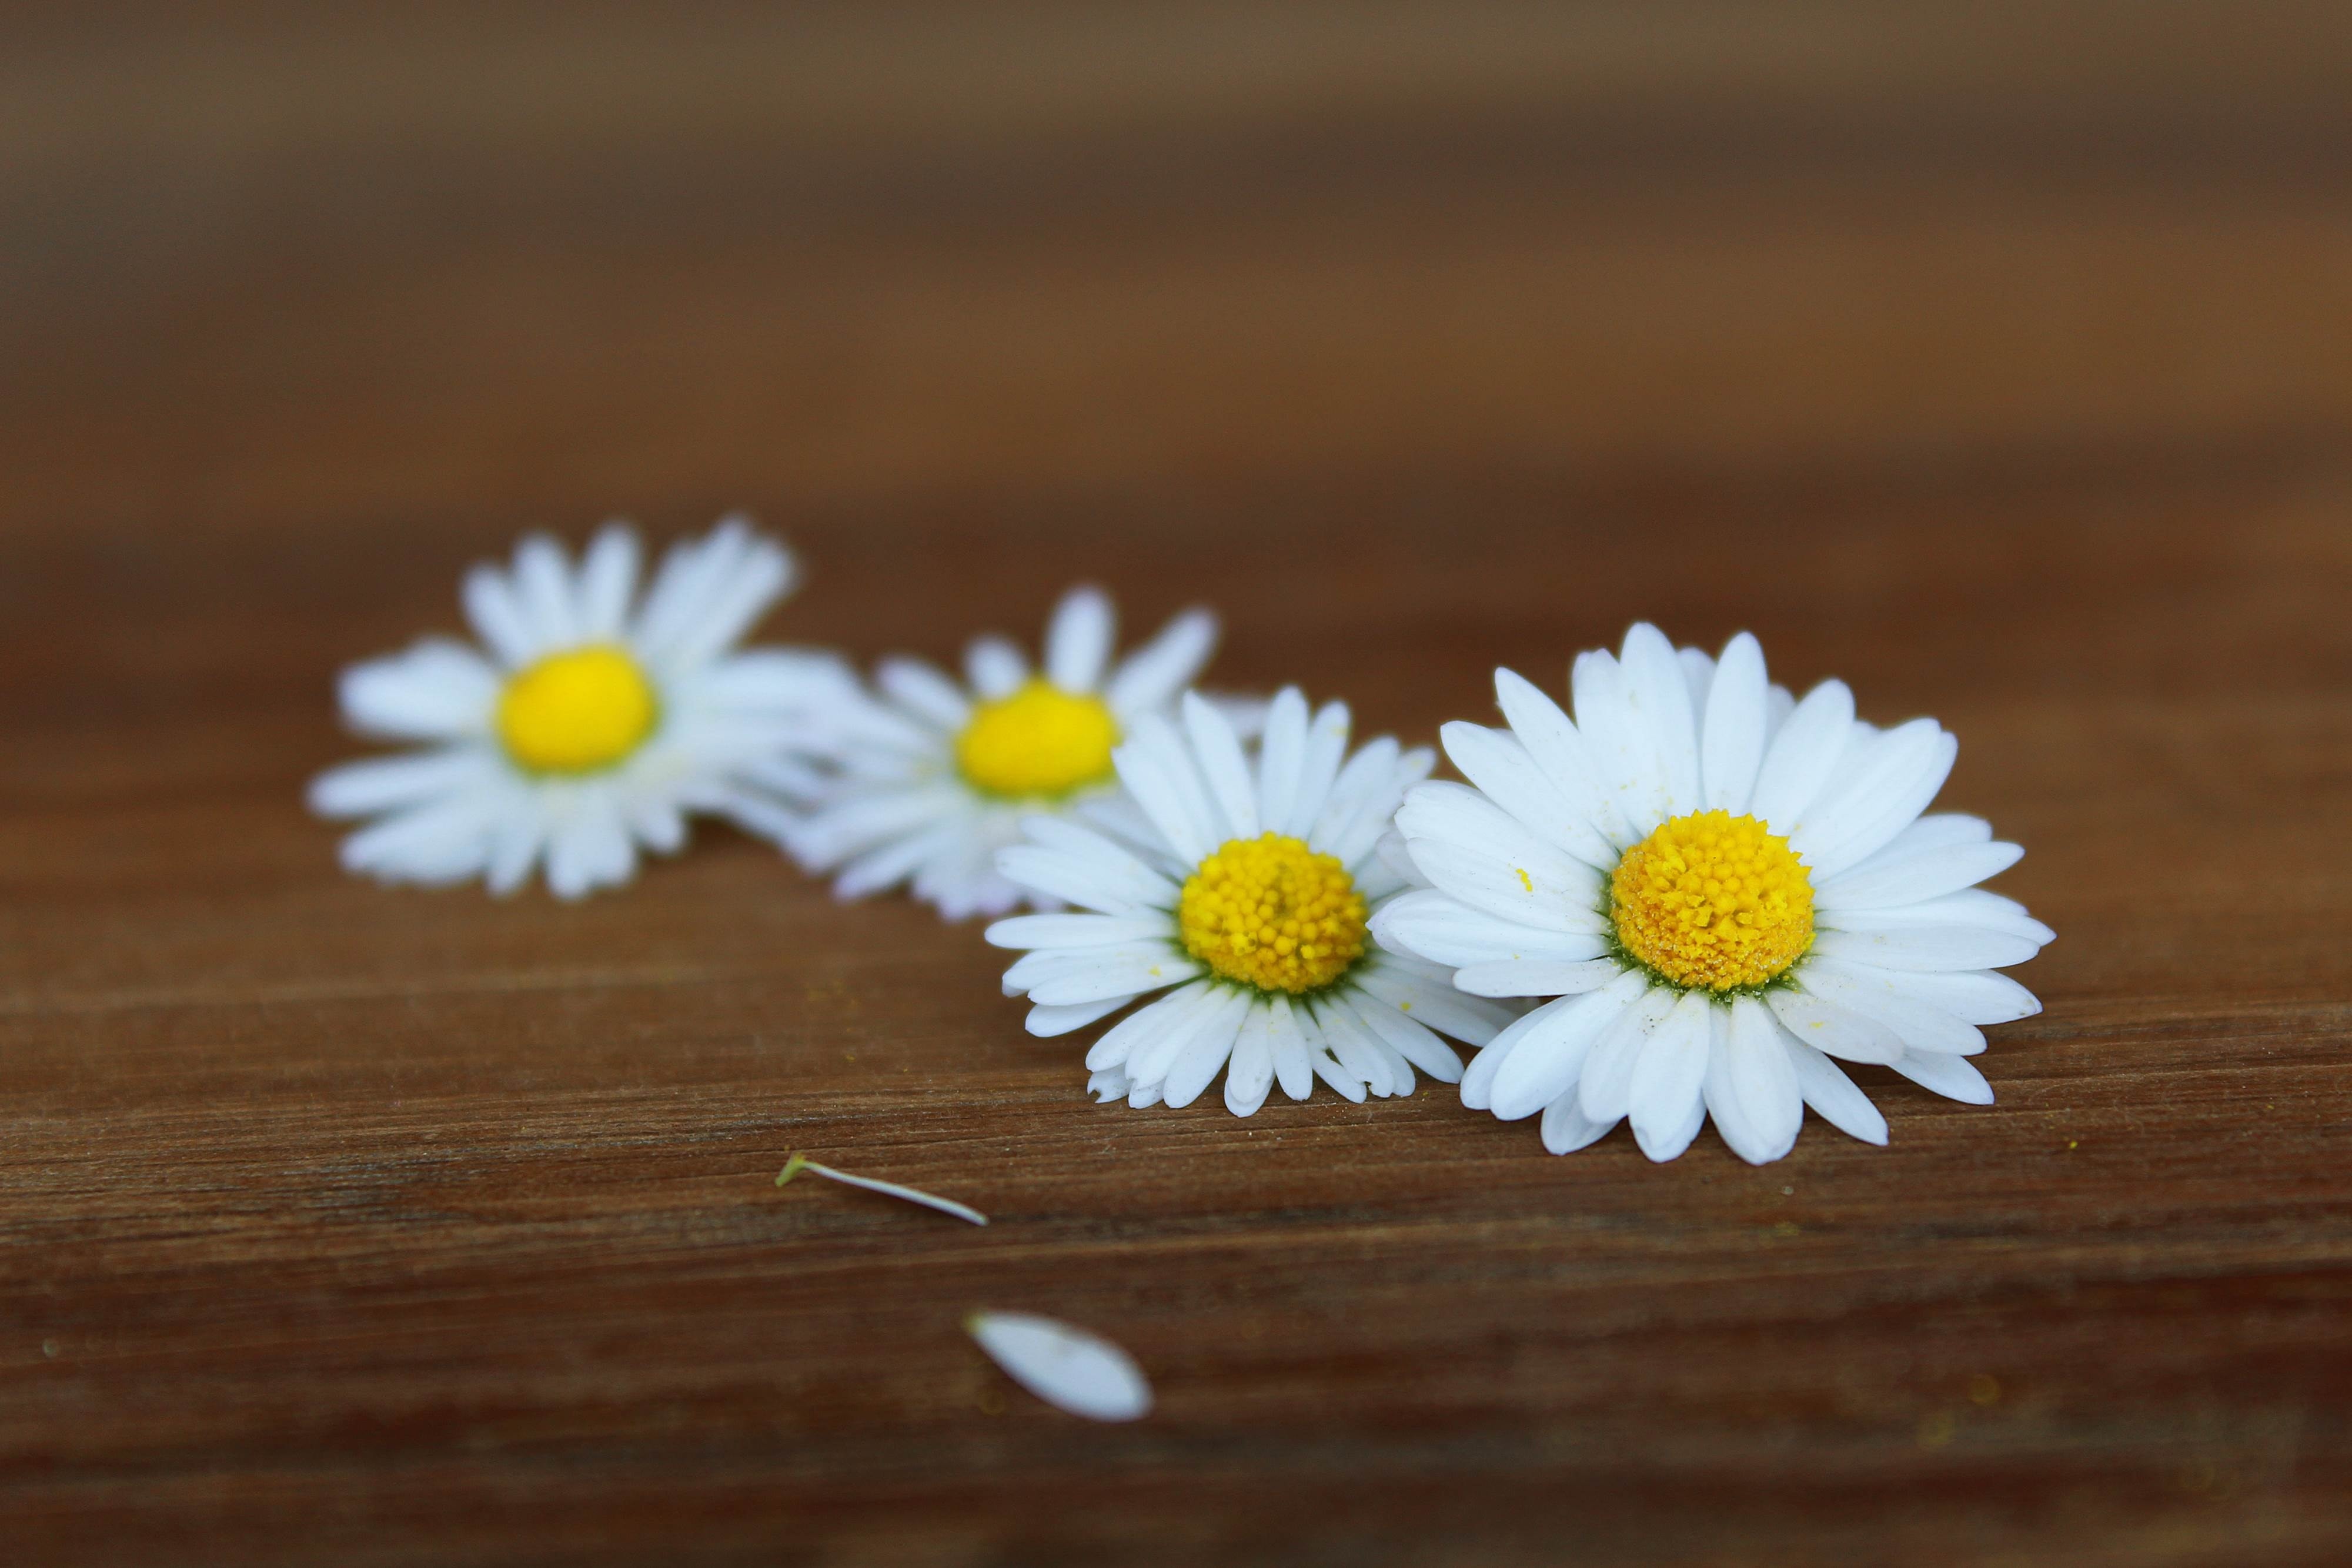 4 white and yellow petaled flowers